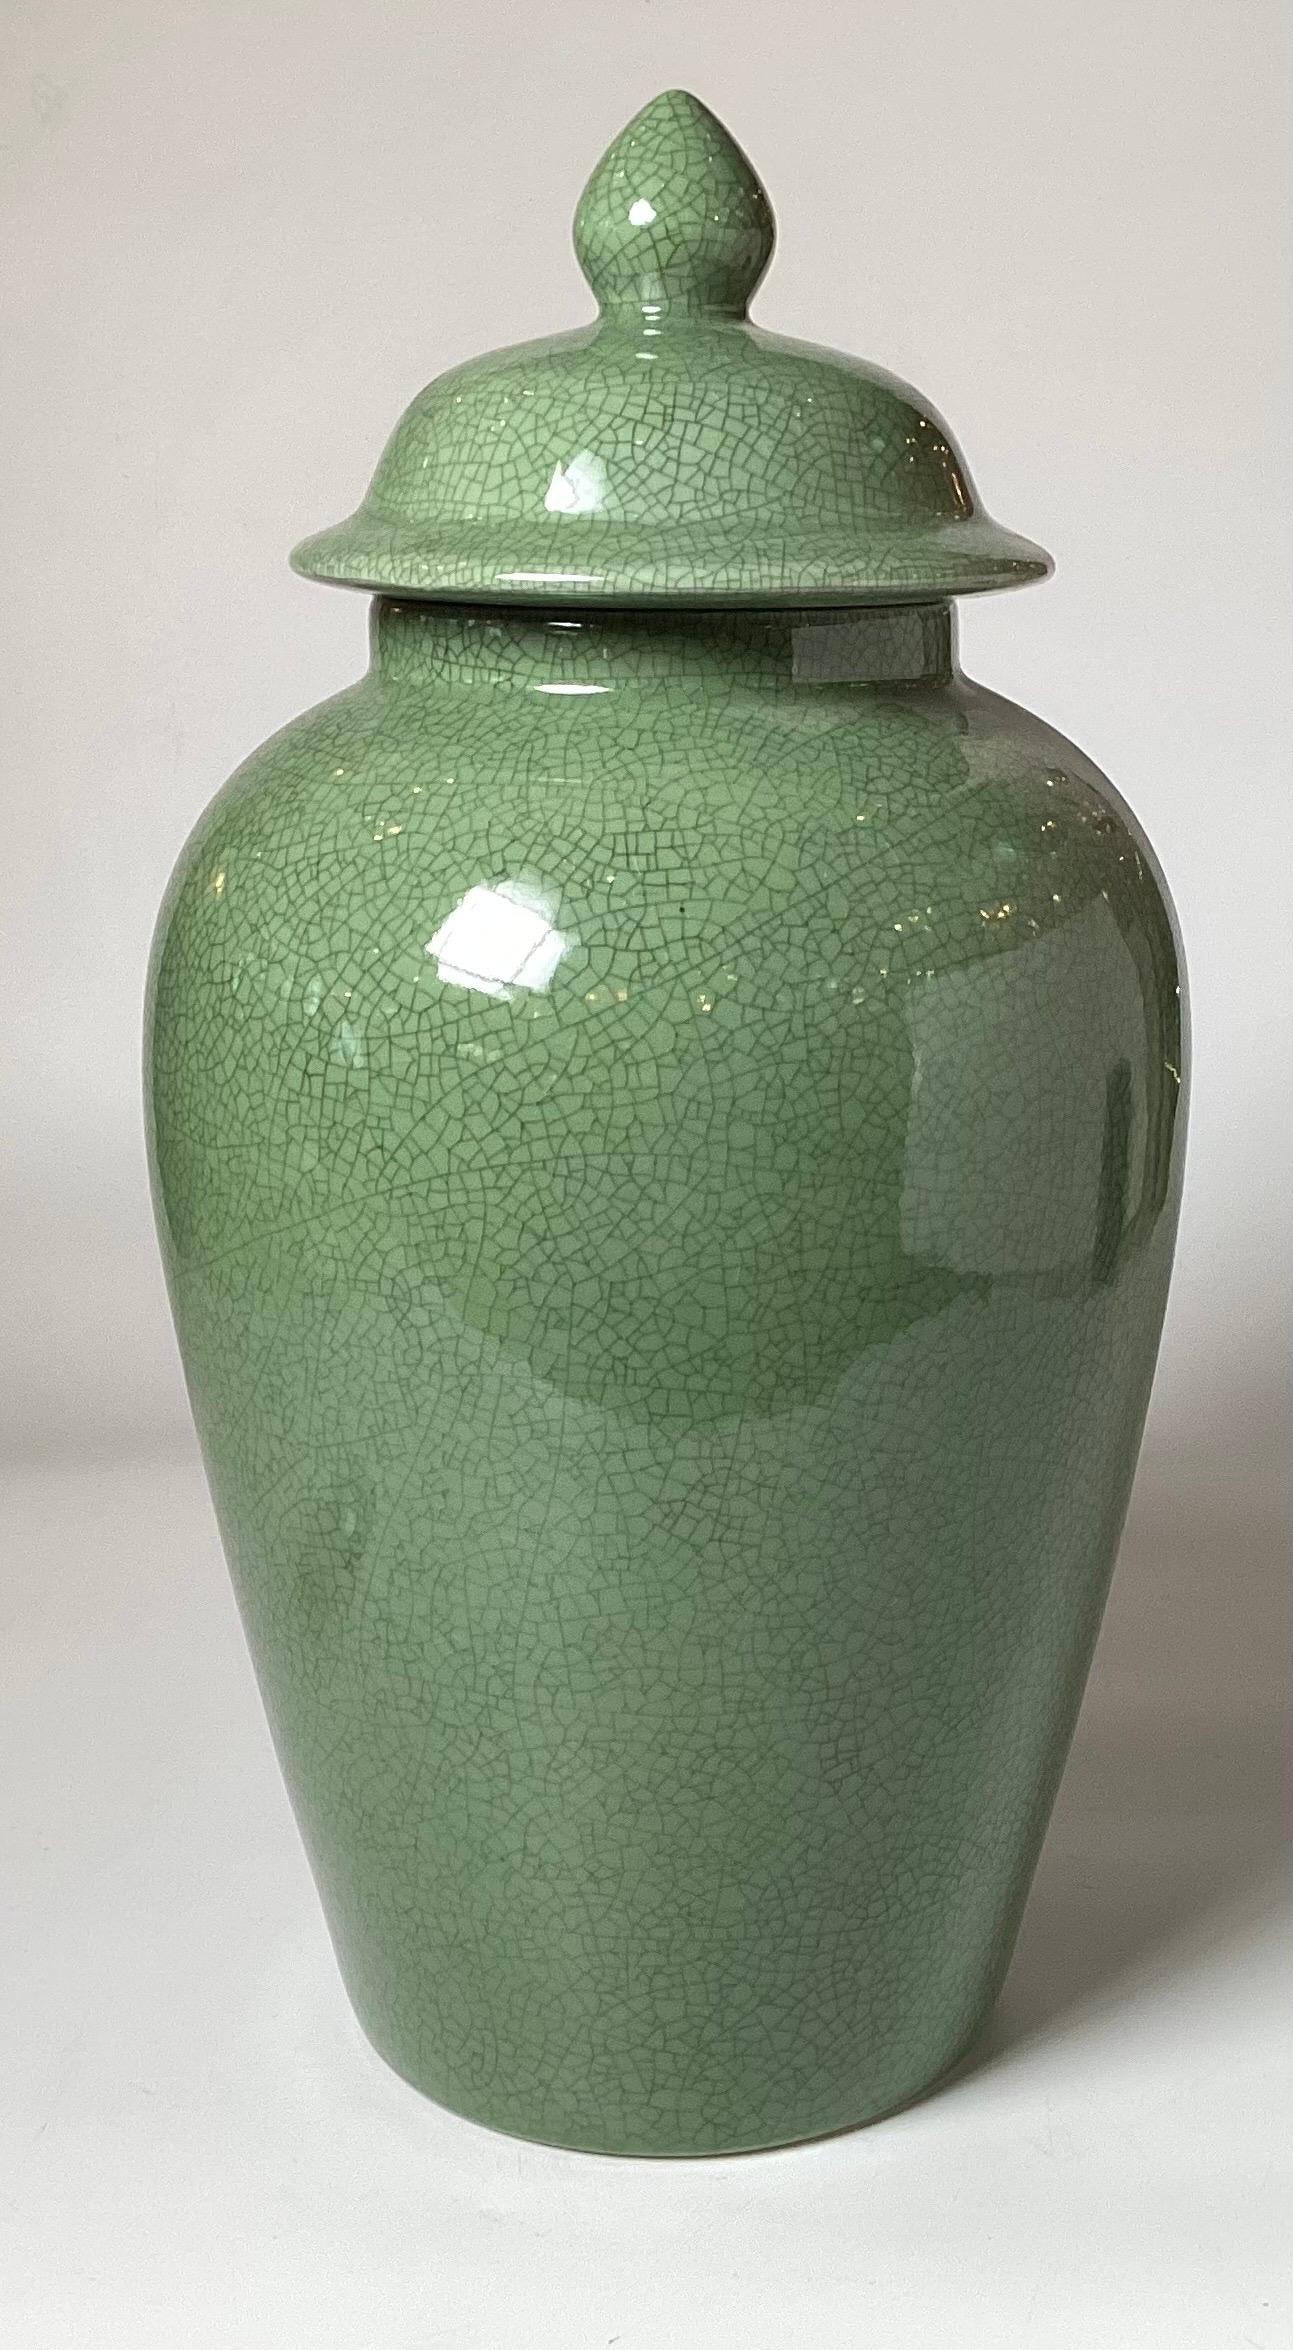 Elegant Chinese porcelain temple jar with jade green glaze in a crackle finish.  The hung mu wood hand carved base with five legs with a reticulated stretcher support.  A total height of 28 inches, the jar is 20 inches tall, the base is 8 inches